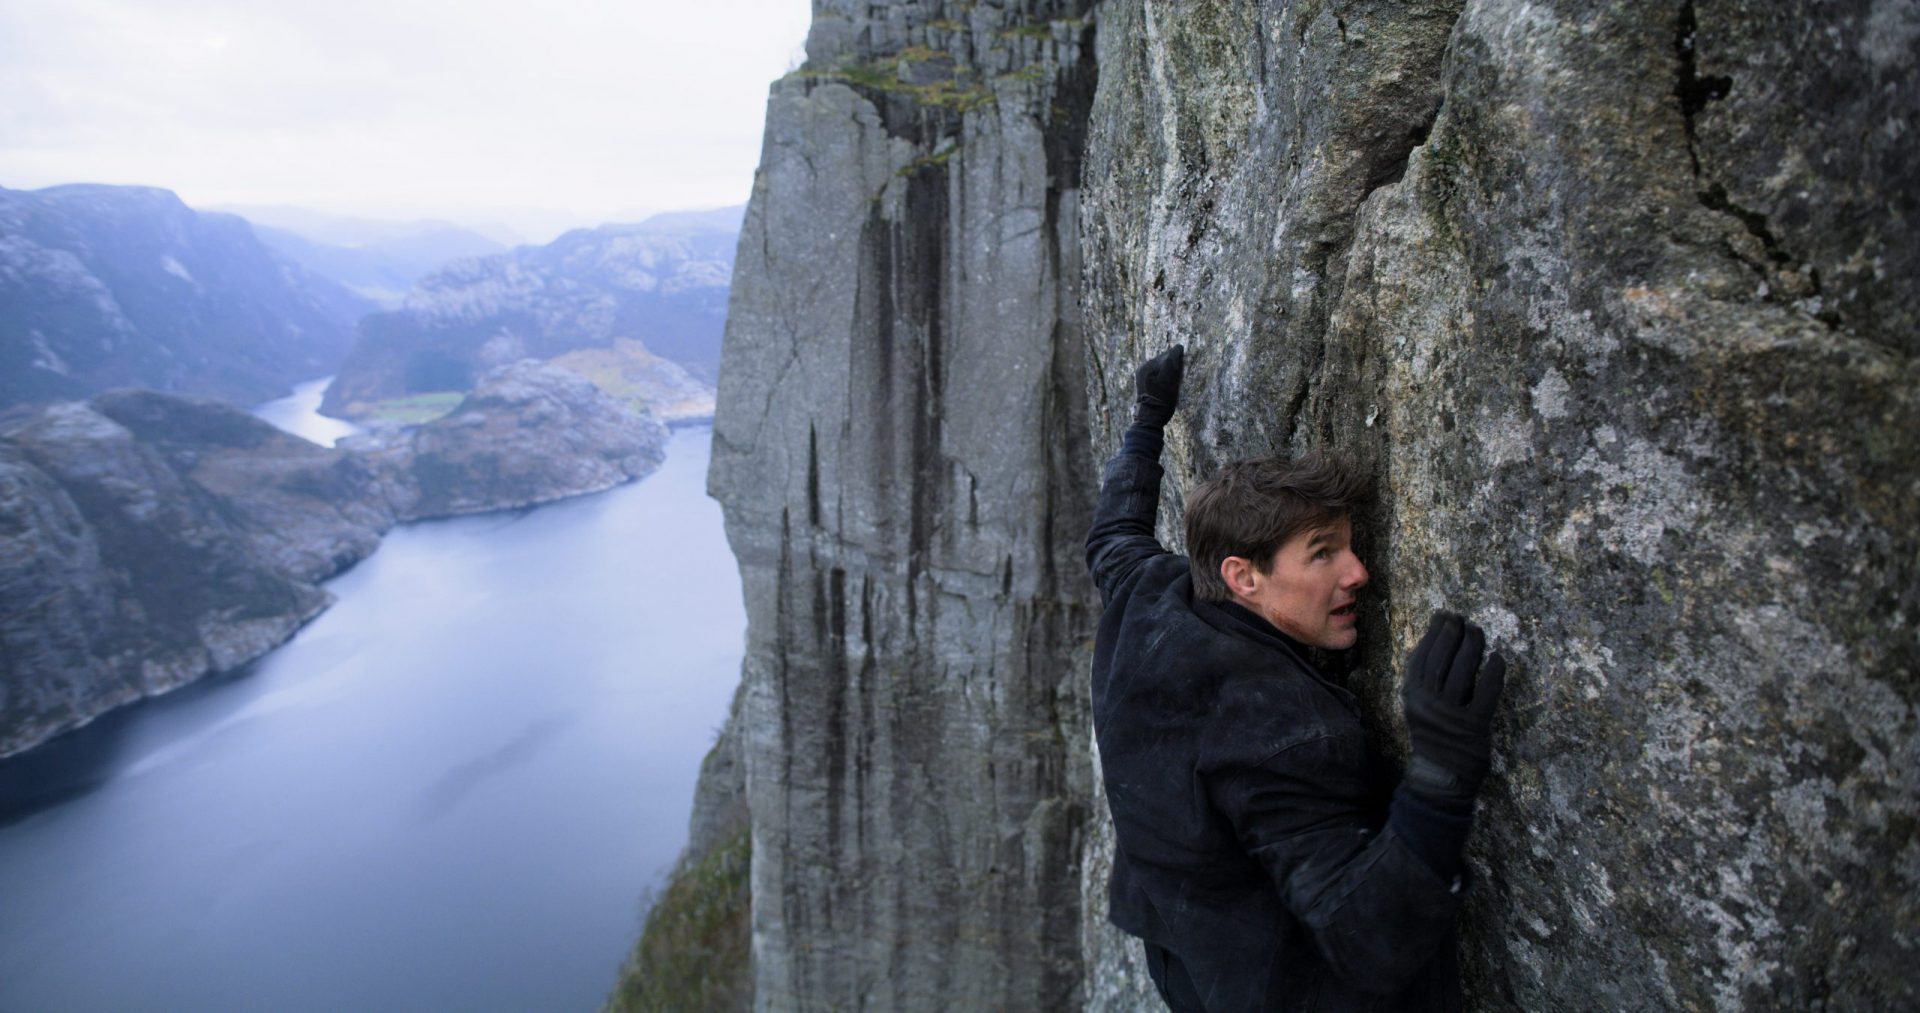 Mission: Impossible 6 – Fallout